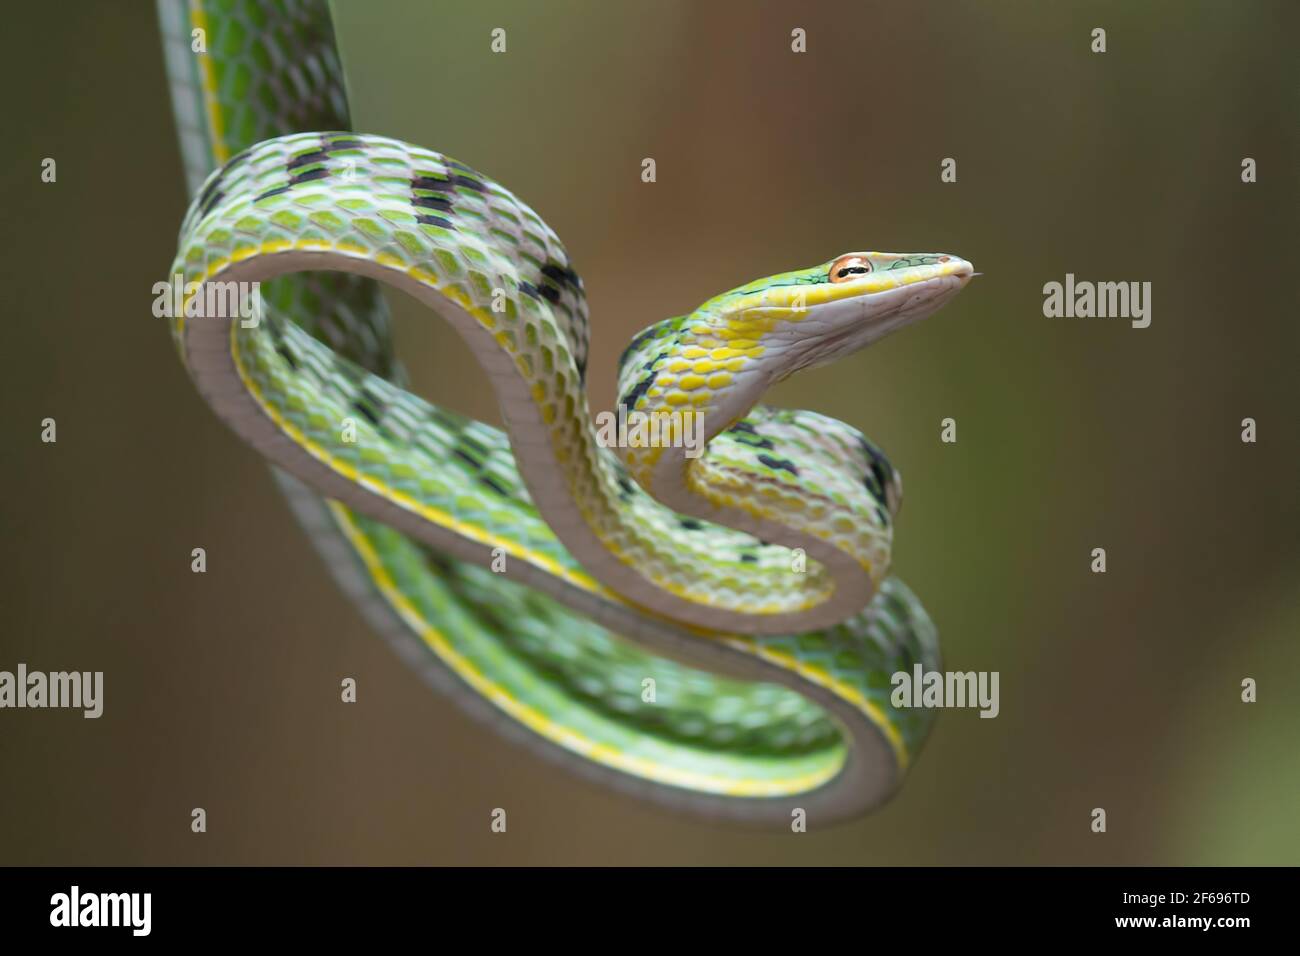 Close up photo of Asian vine snake on the tree branch Stock Photo